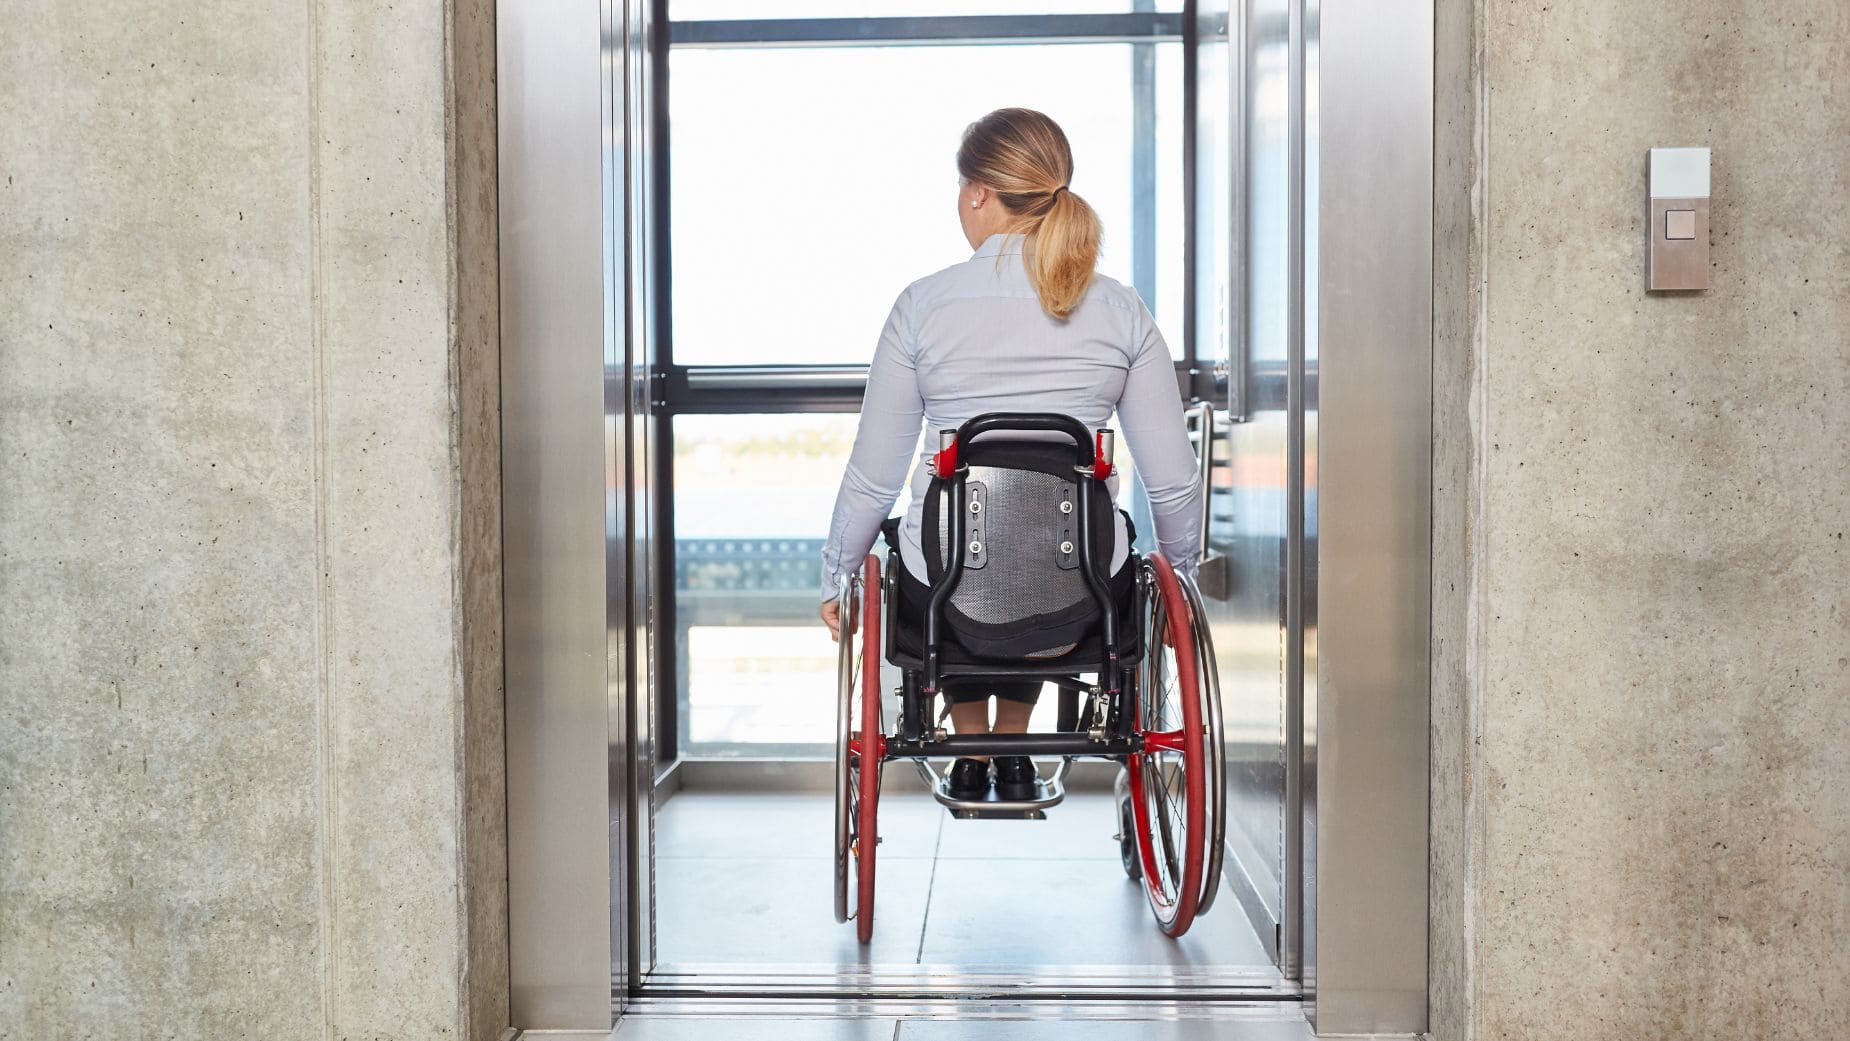 You have to meet some requirements to get the new Disability Benefit